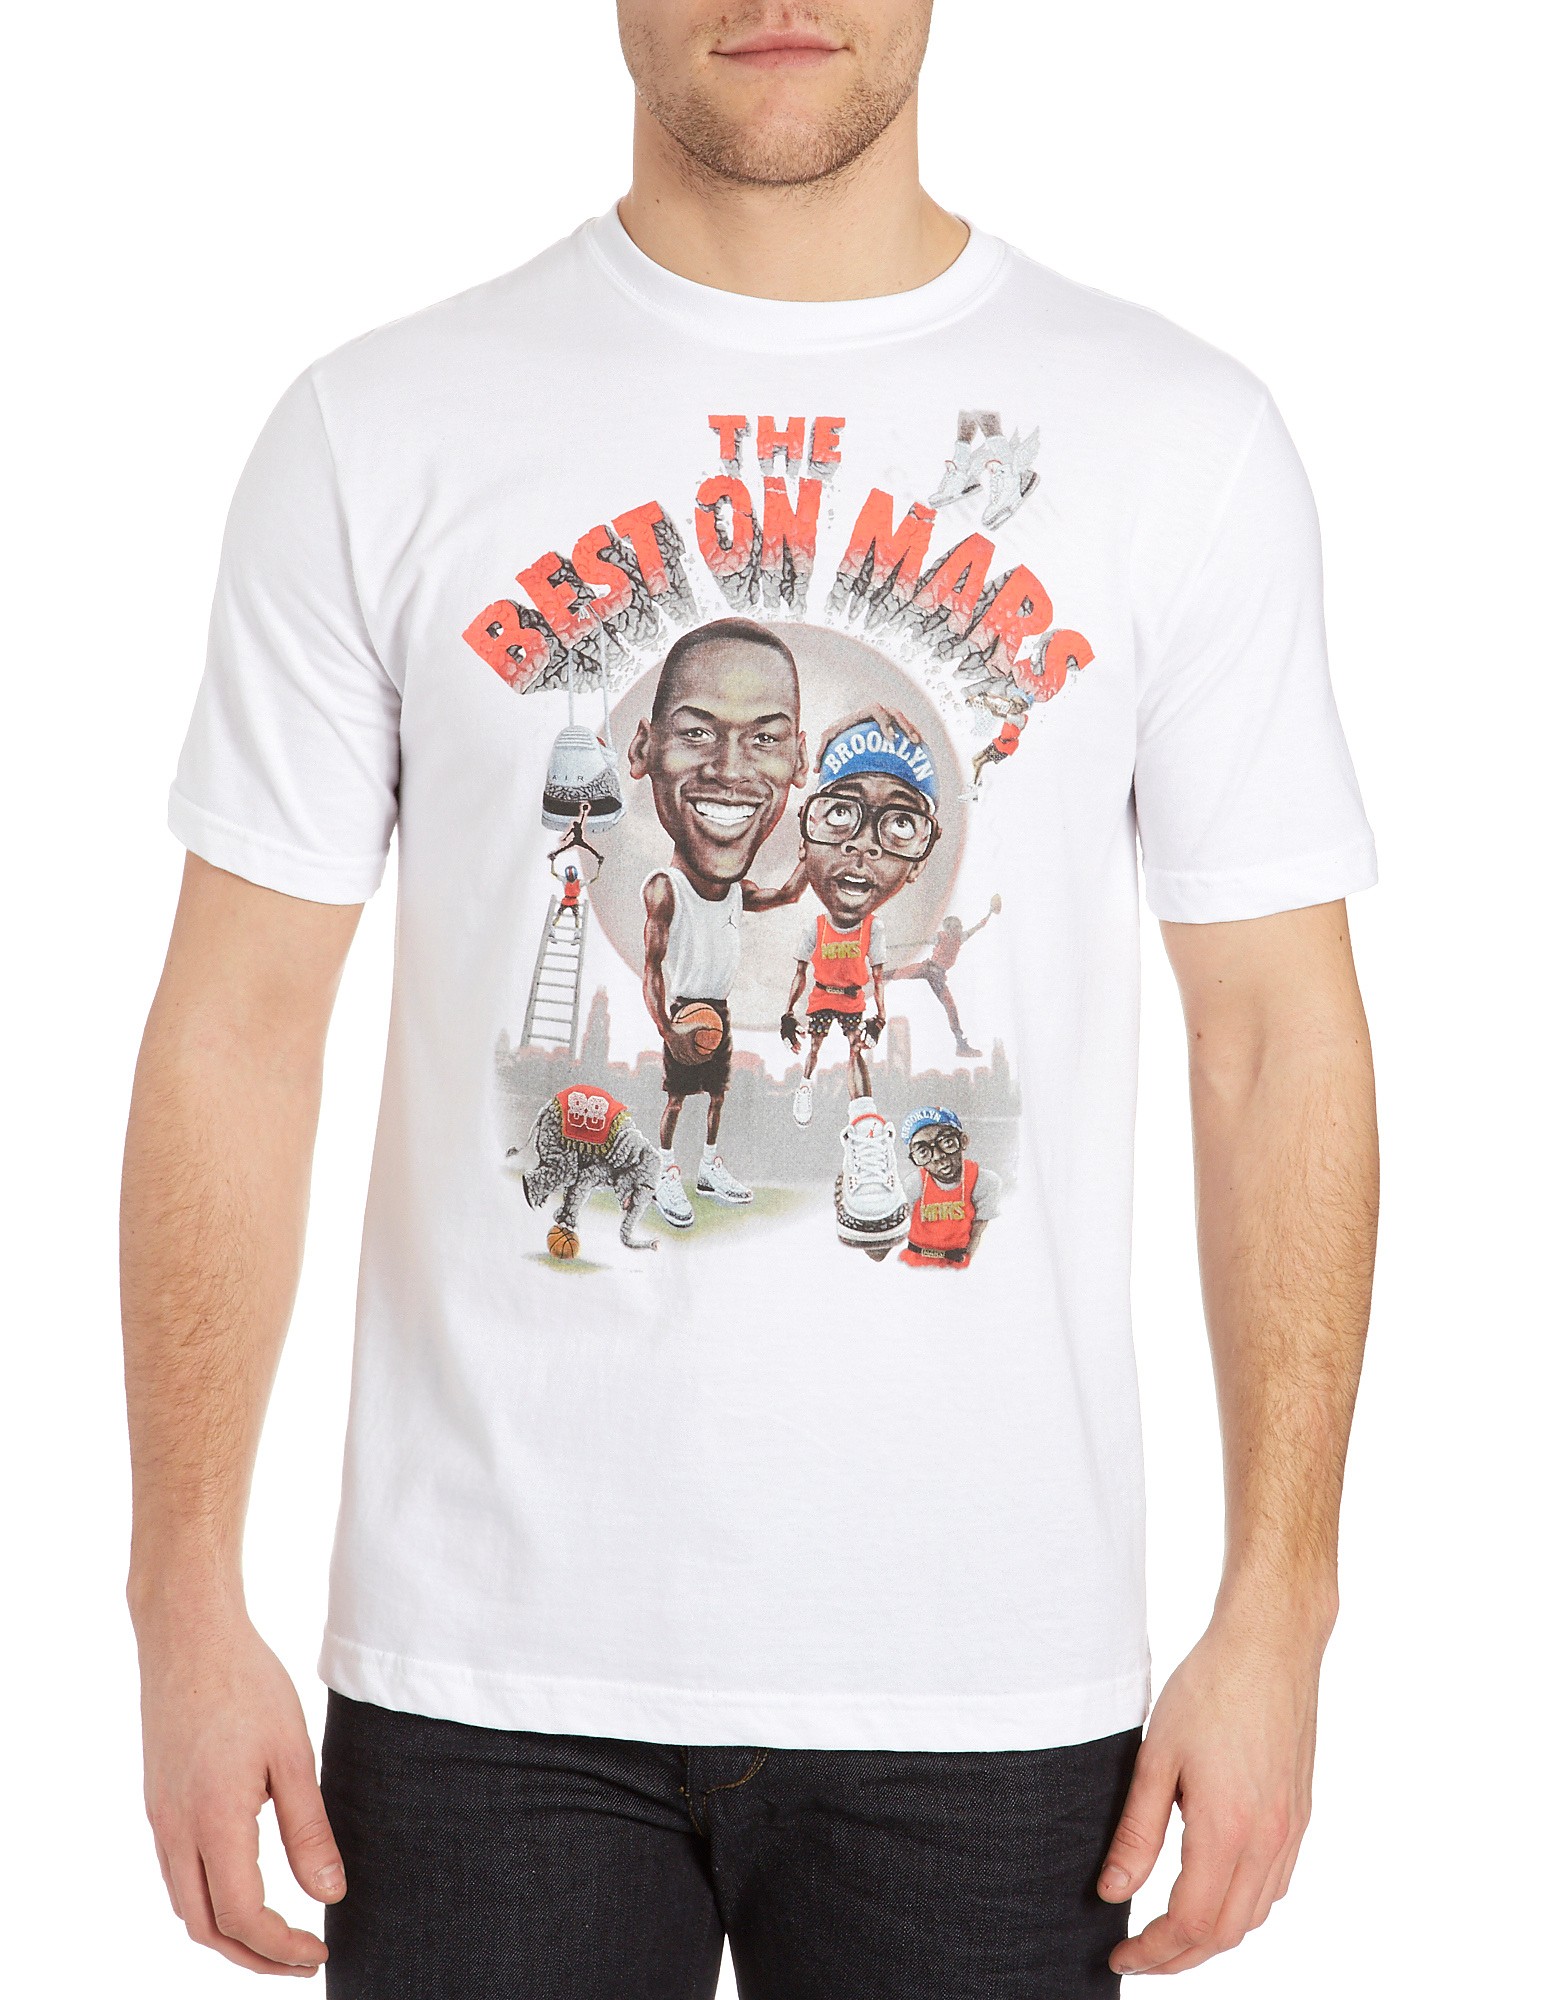 Mike and Mars T-Shirt